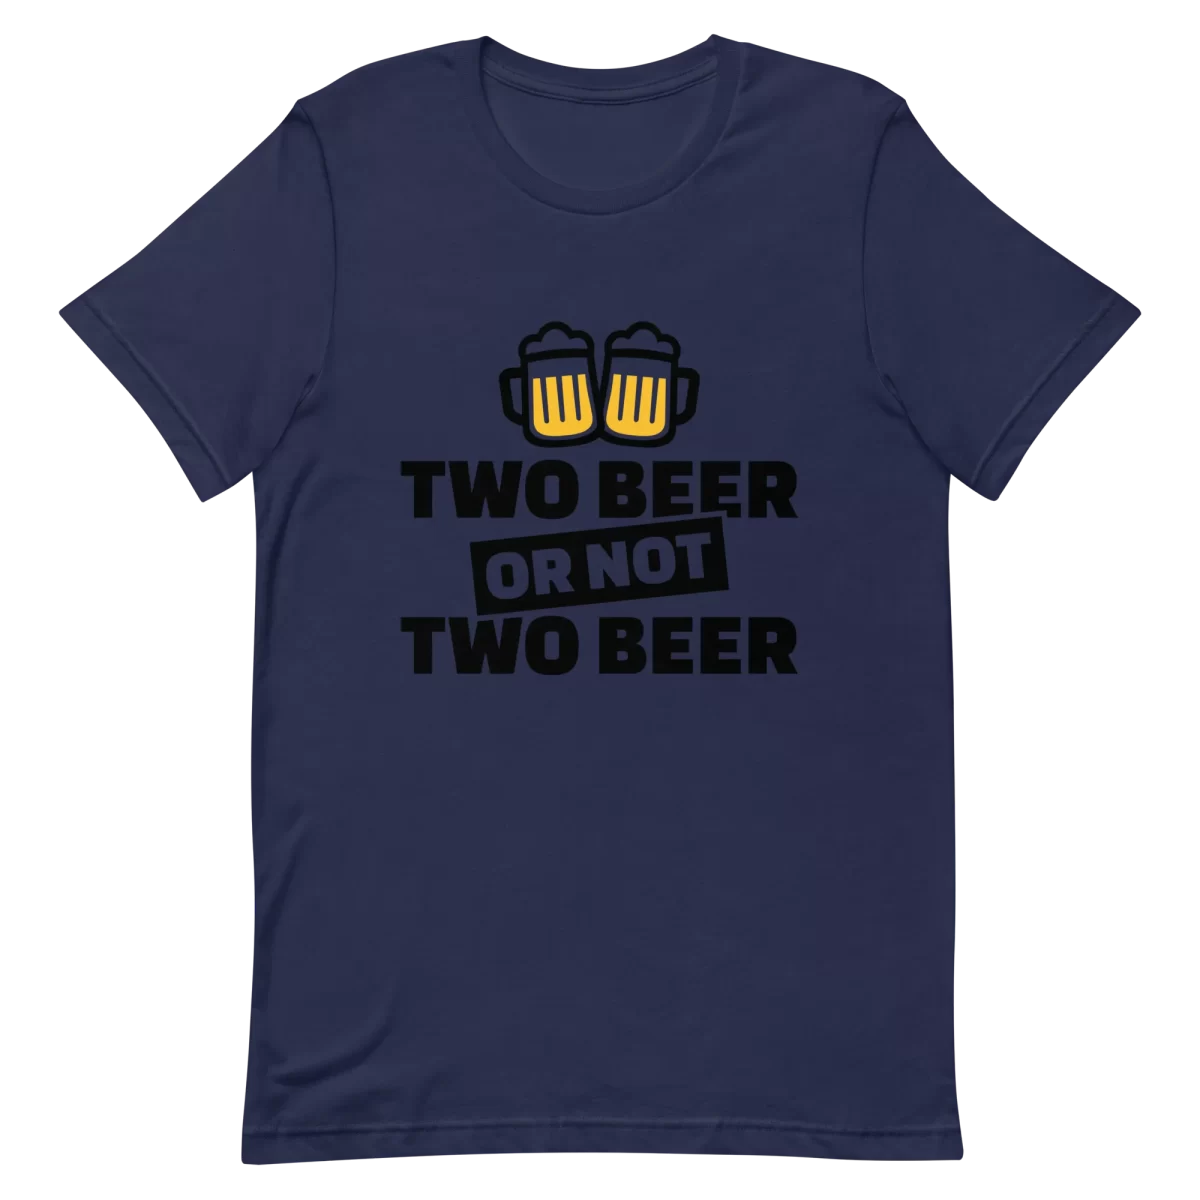 Unisex T-Shirt - Two Beer or Not to Beer - Navy